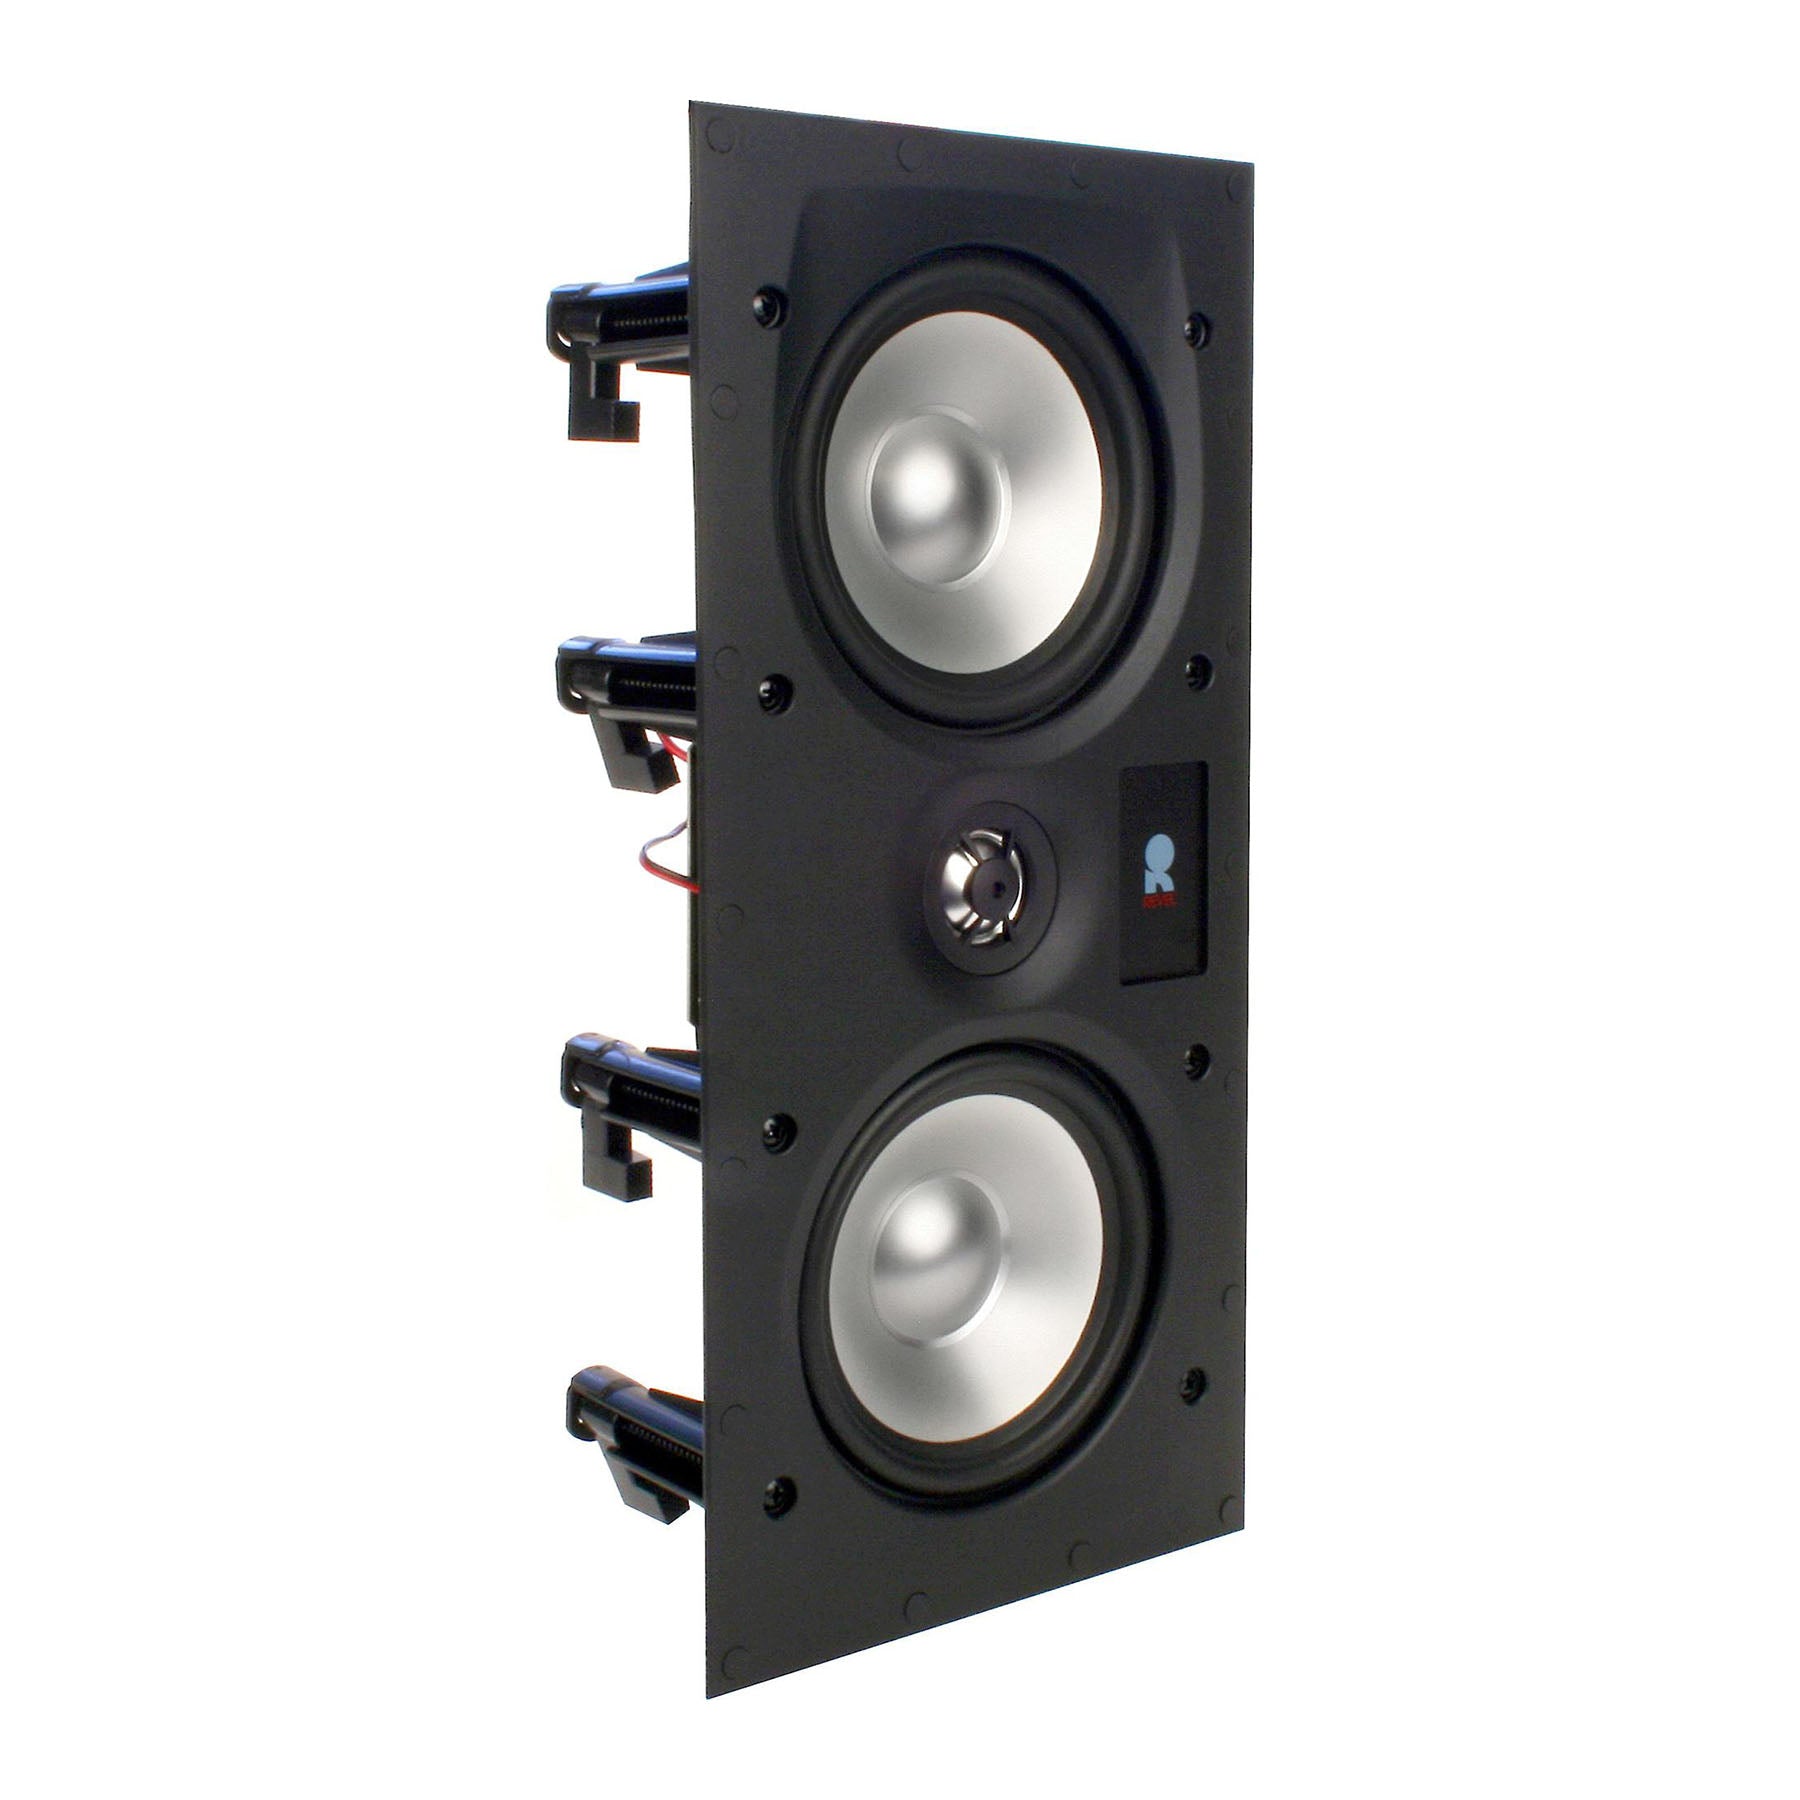 Revel W253L LCR Suitable for Vertical or Horizontal Orientation